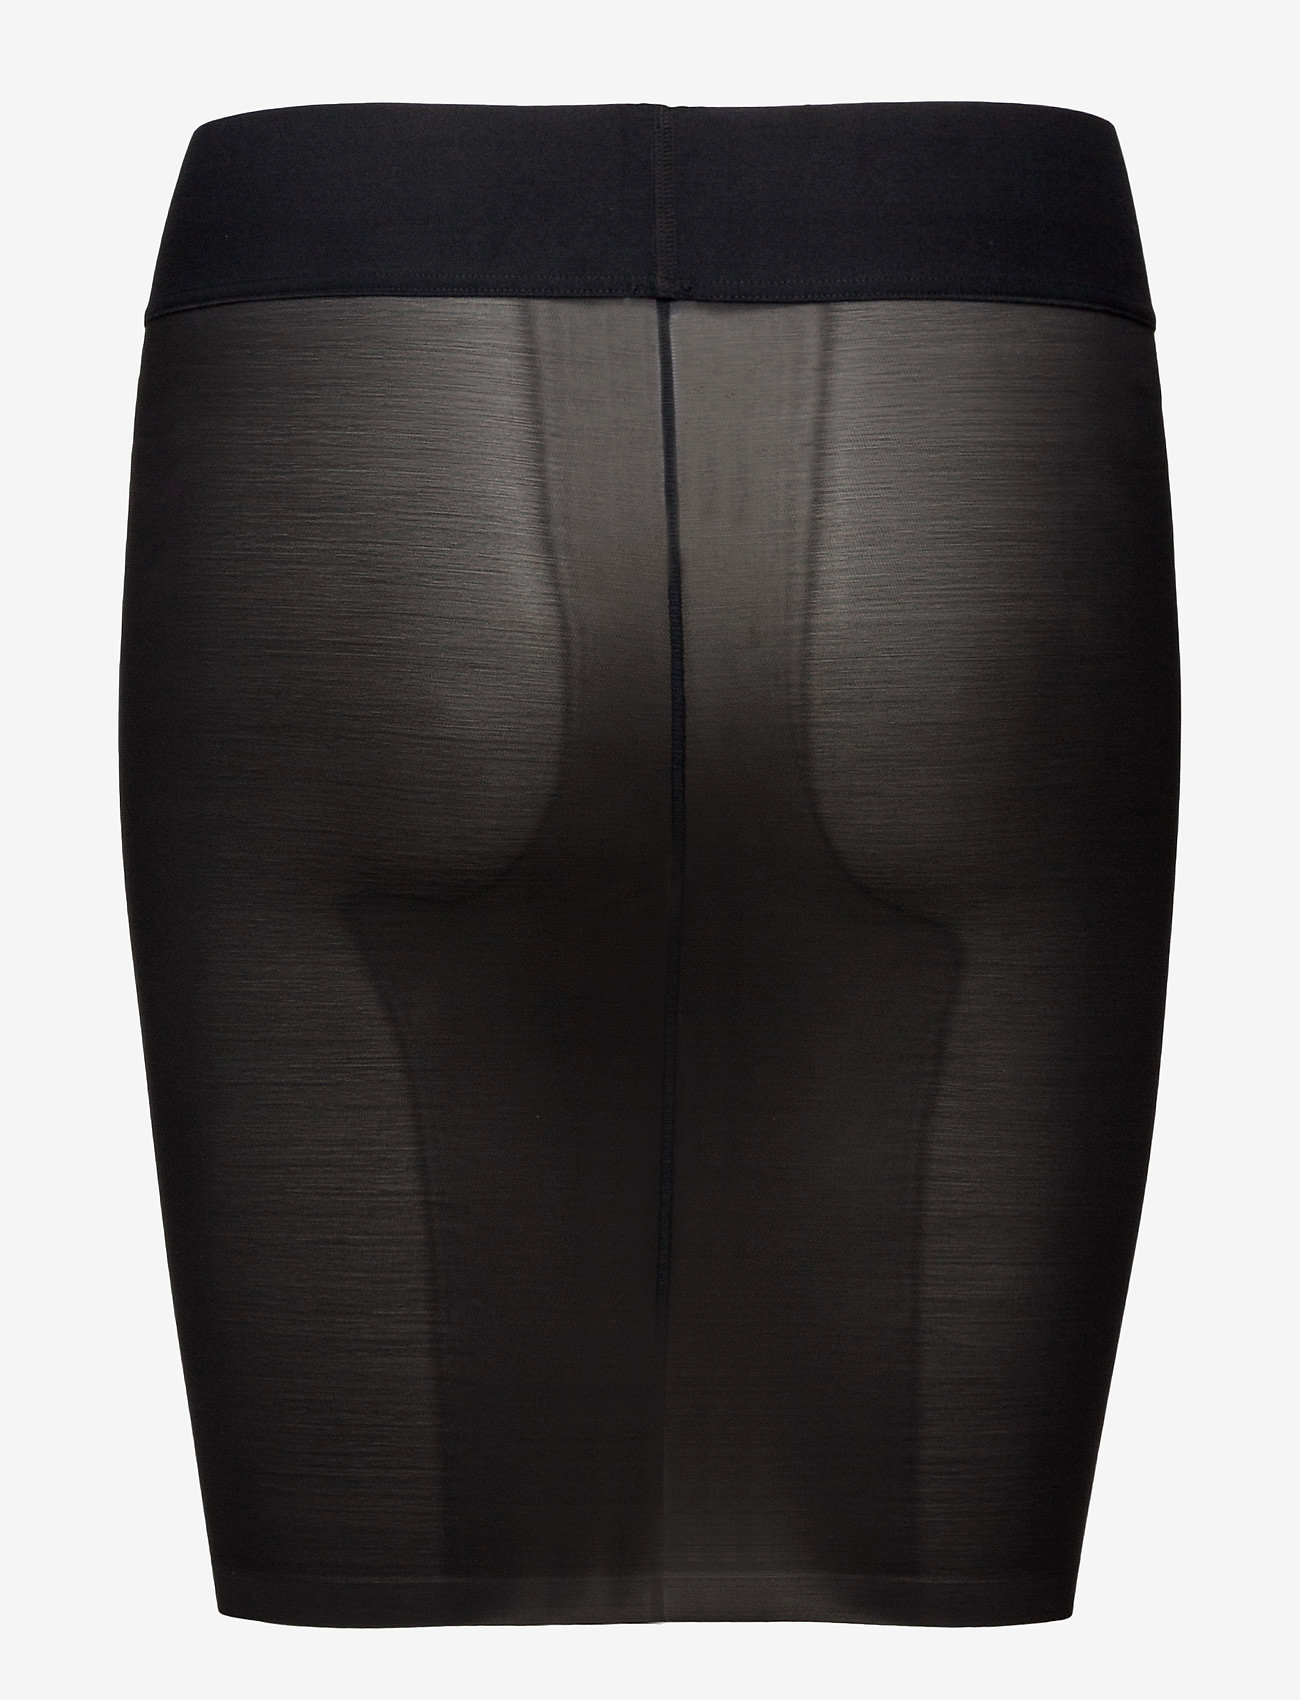 Wolford - Sheer Touch Forming Skirt - black - 1